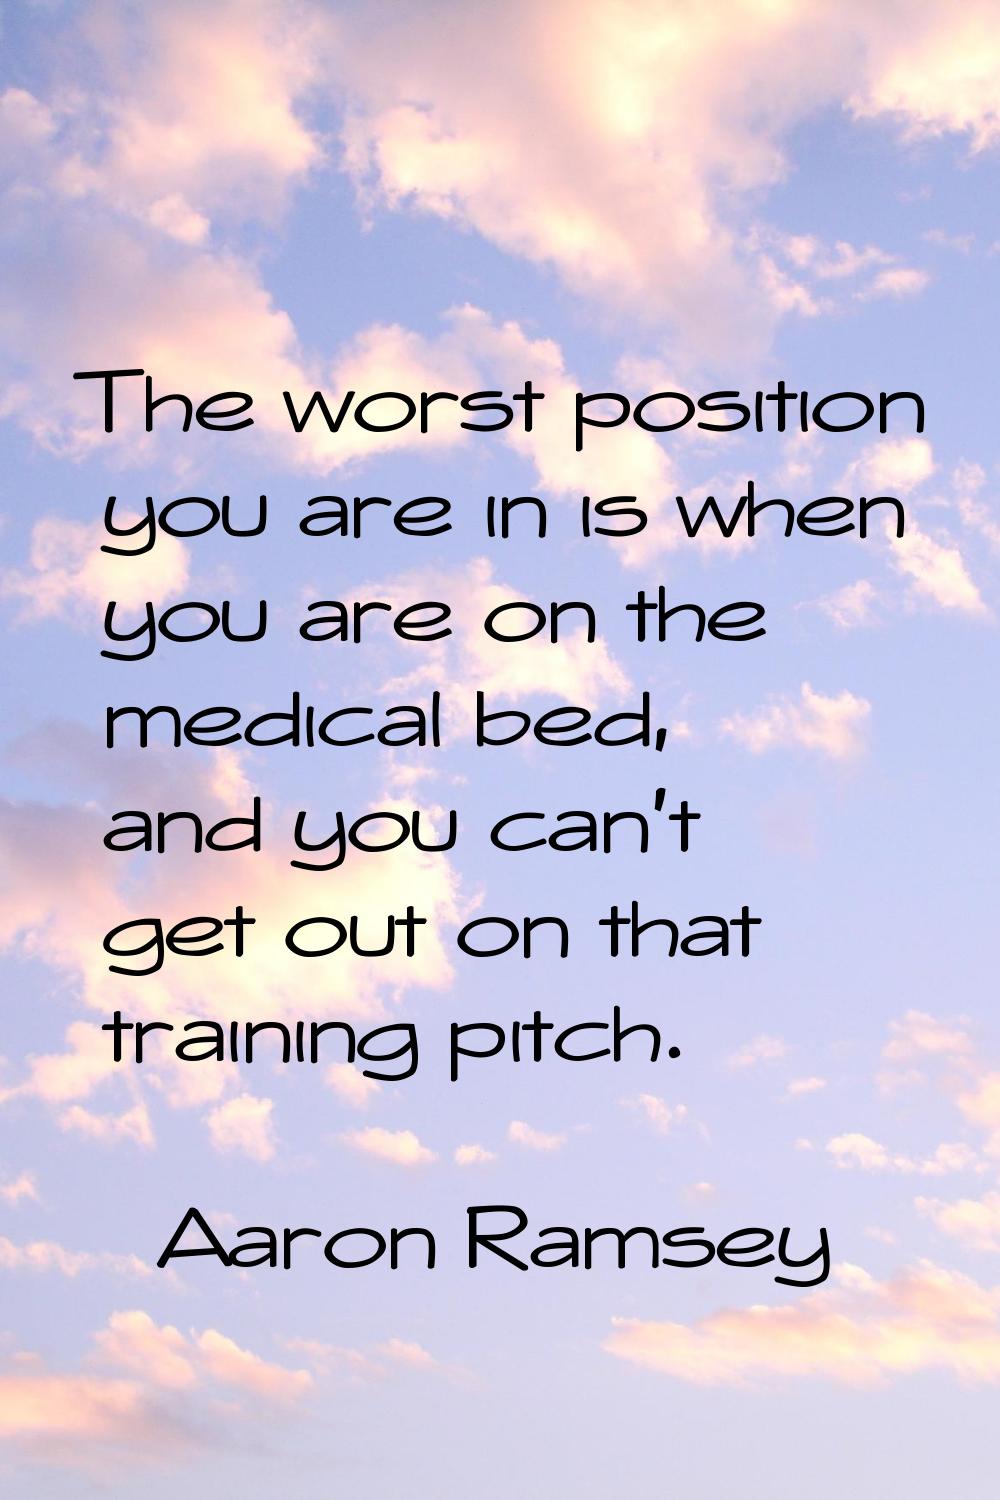 The worst position you are in is when you are on the medical bed, and you can't get out on that tra